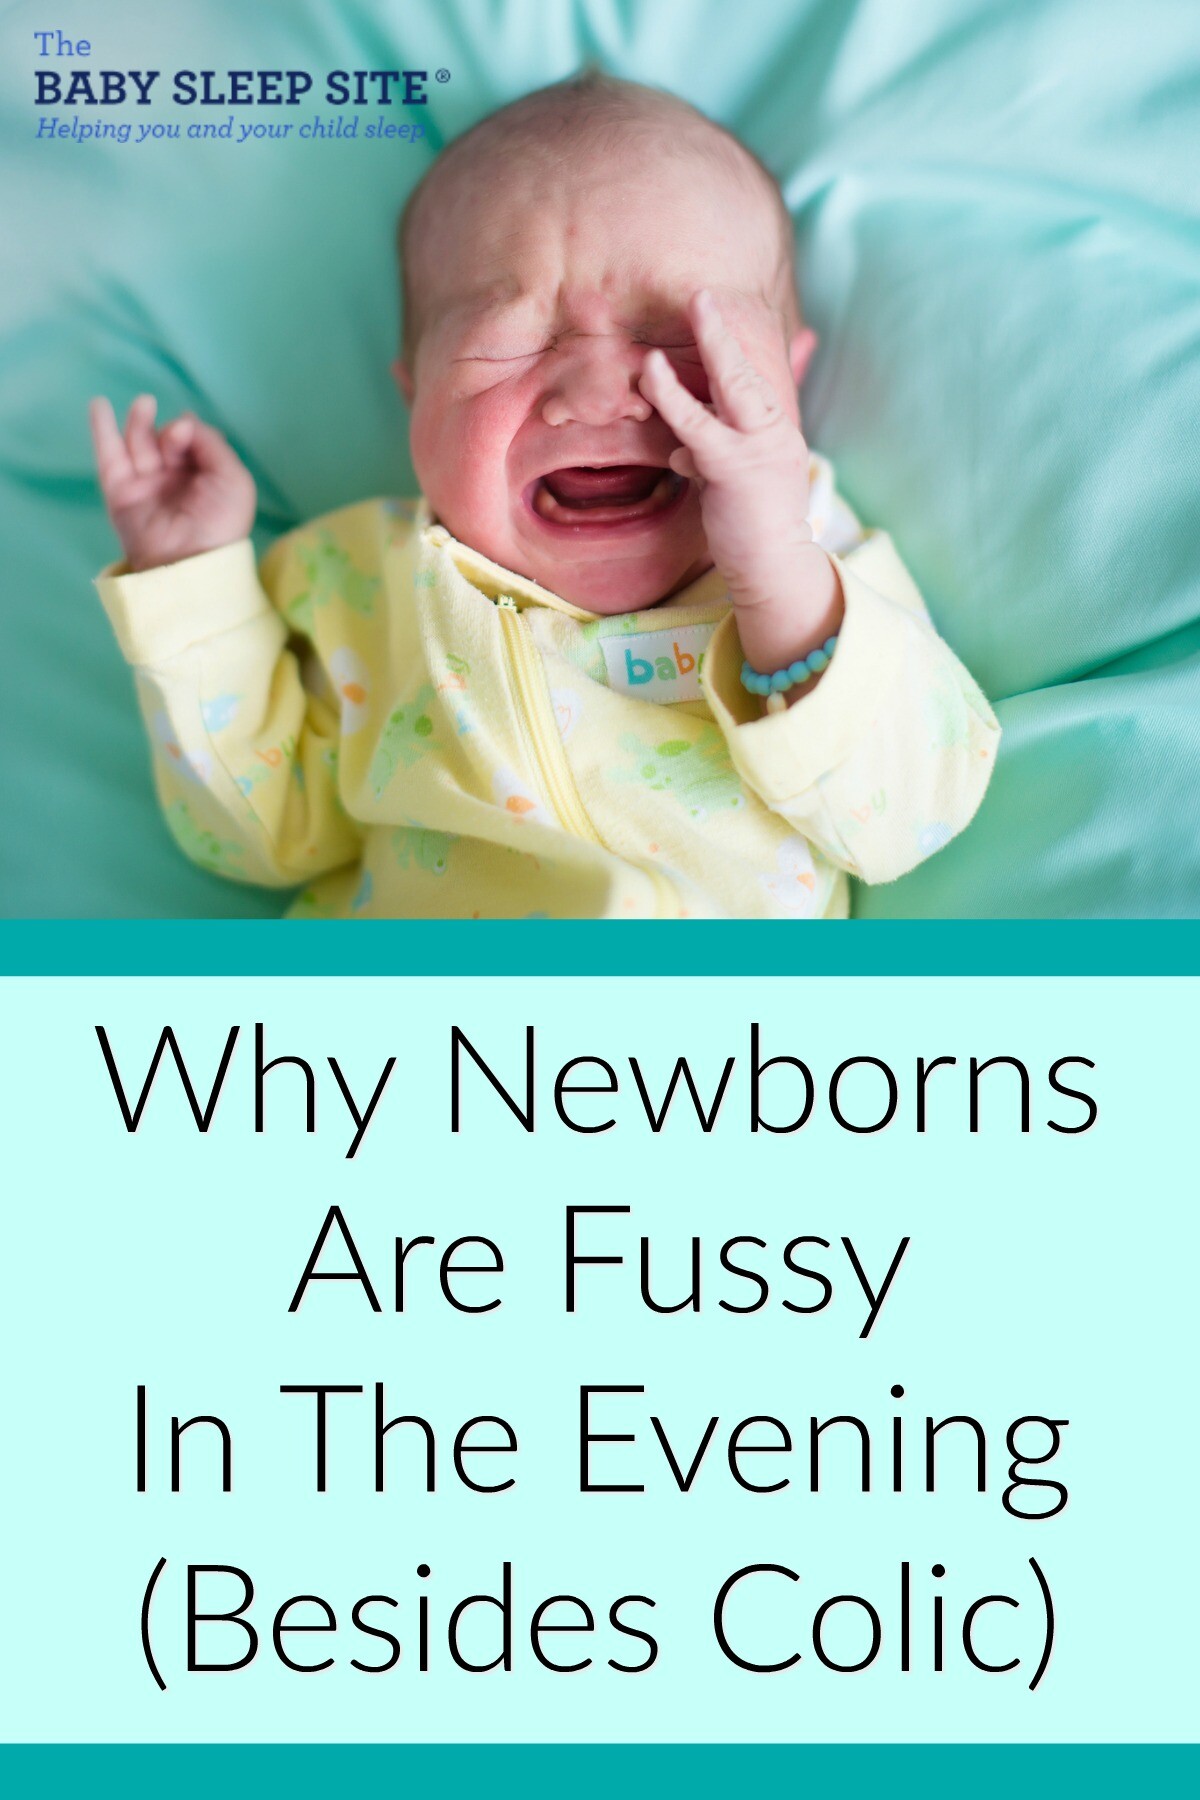 reasons for fussy baby at night